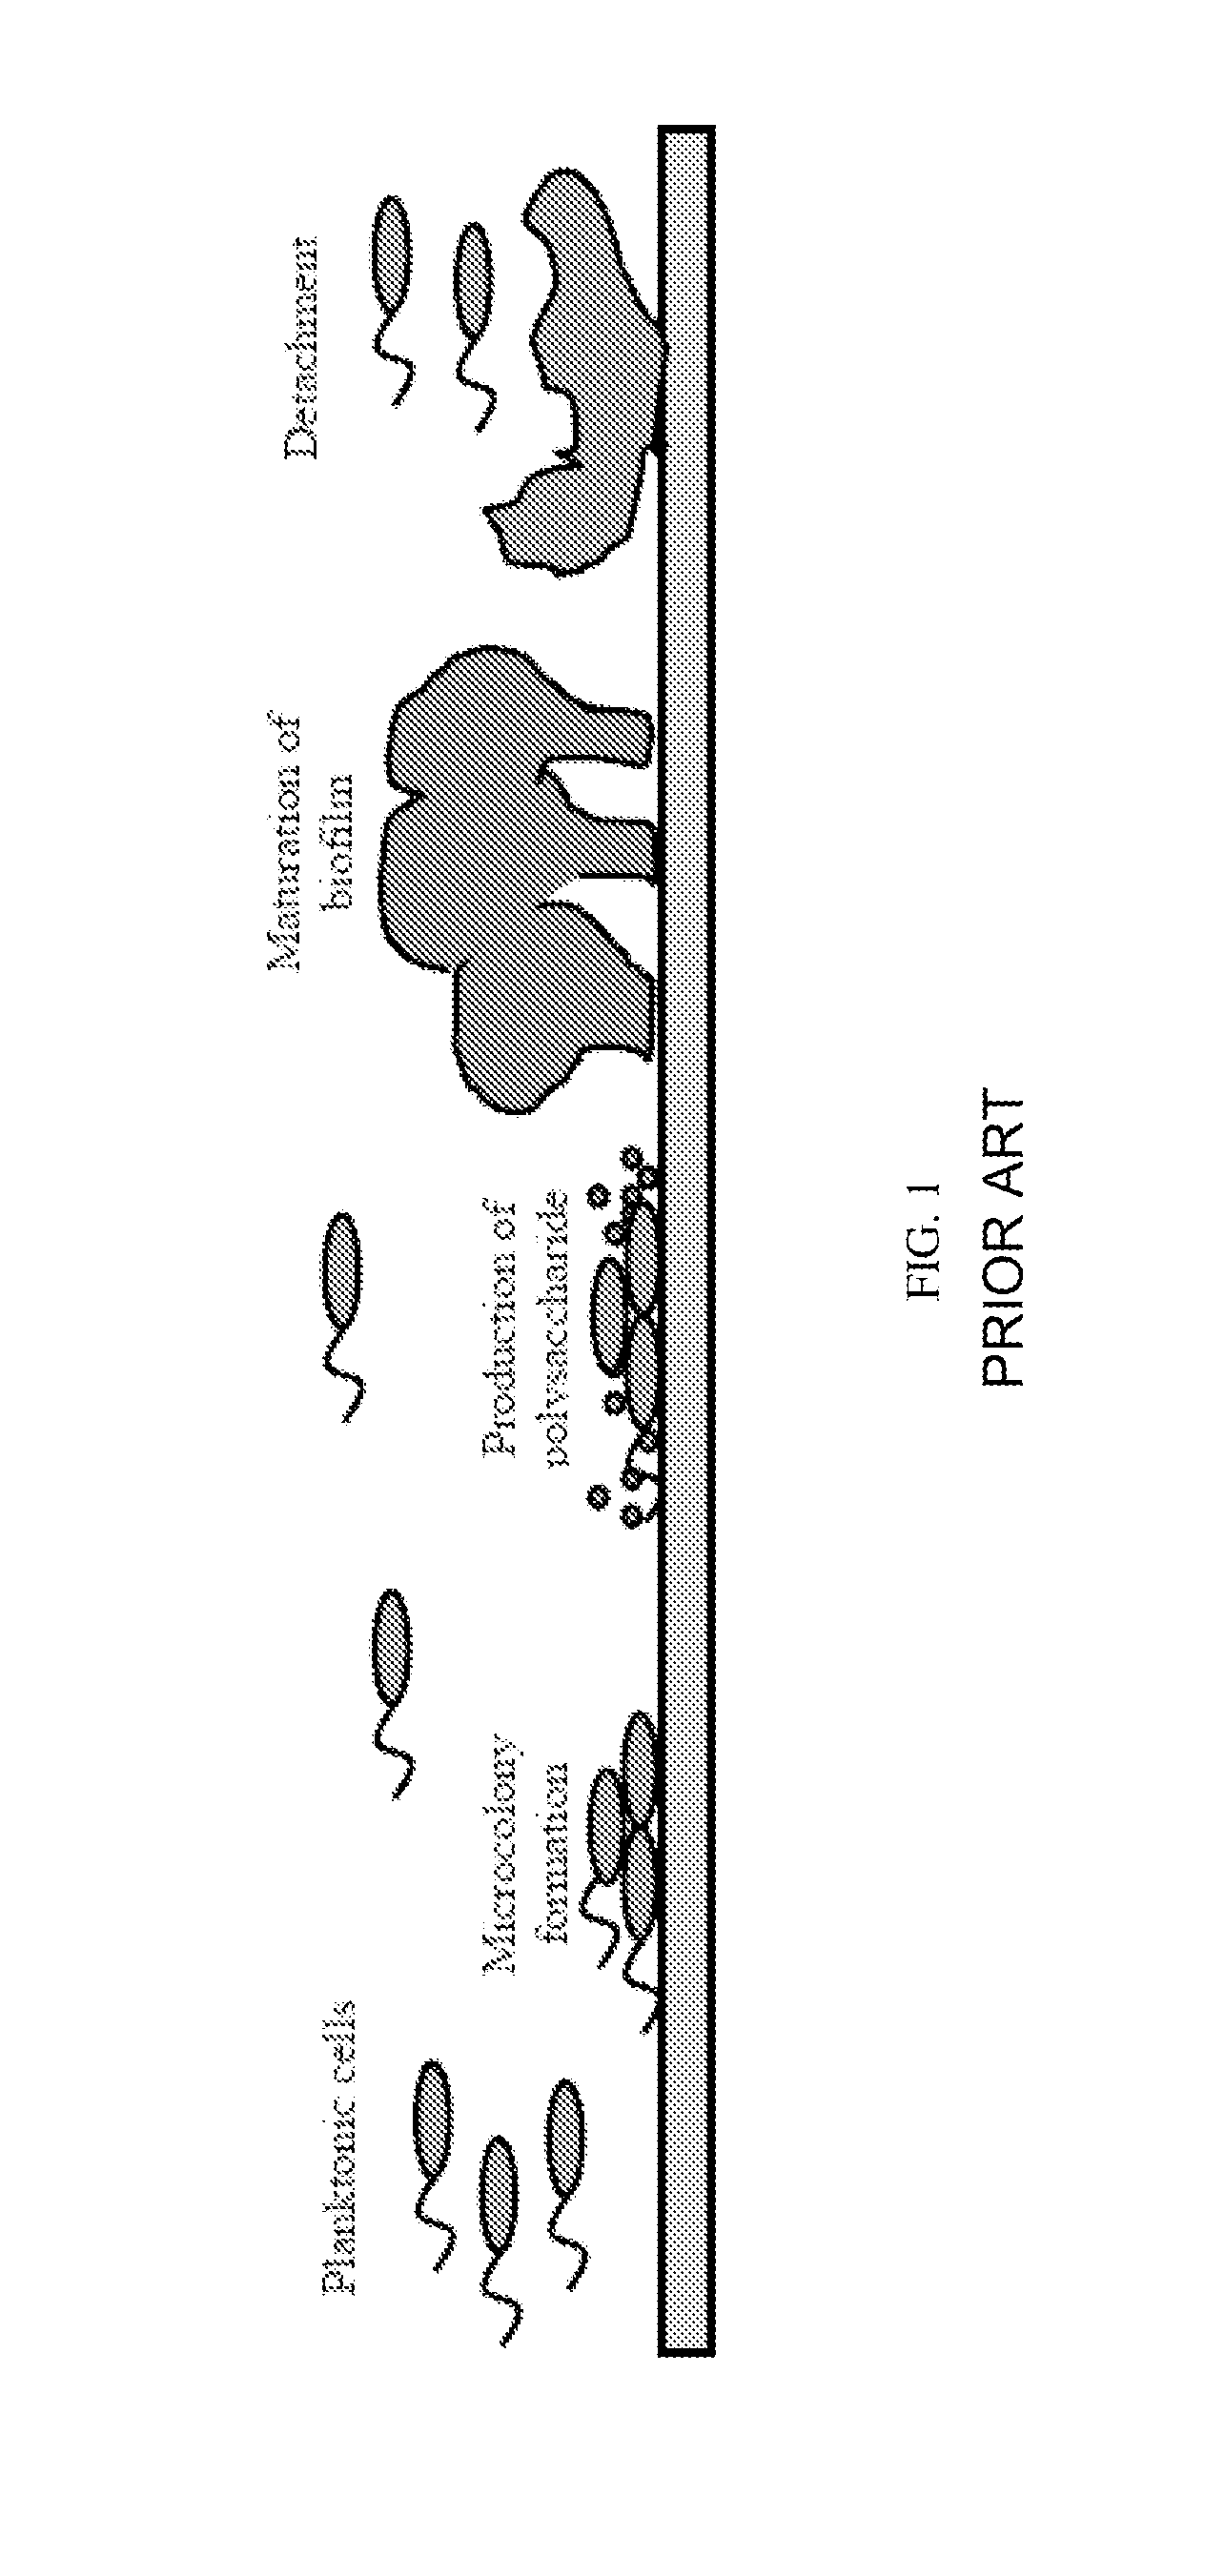 System and method for controlling bacterial cells with weak electric currents